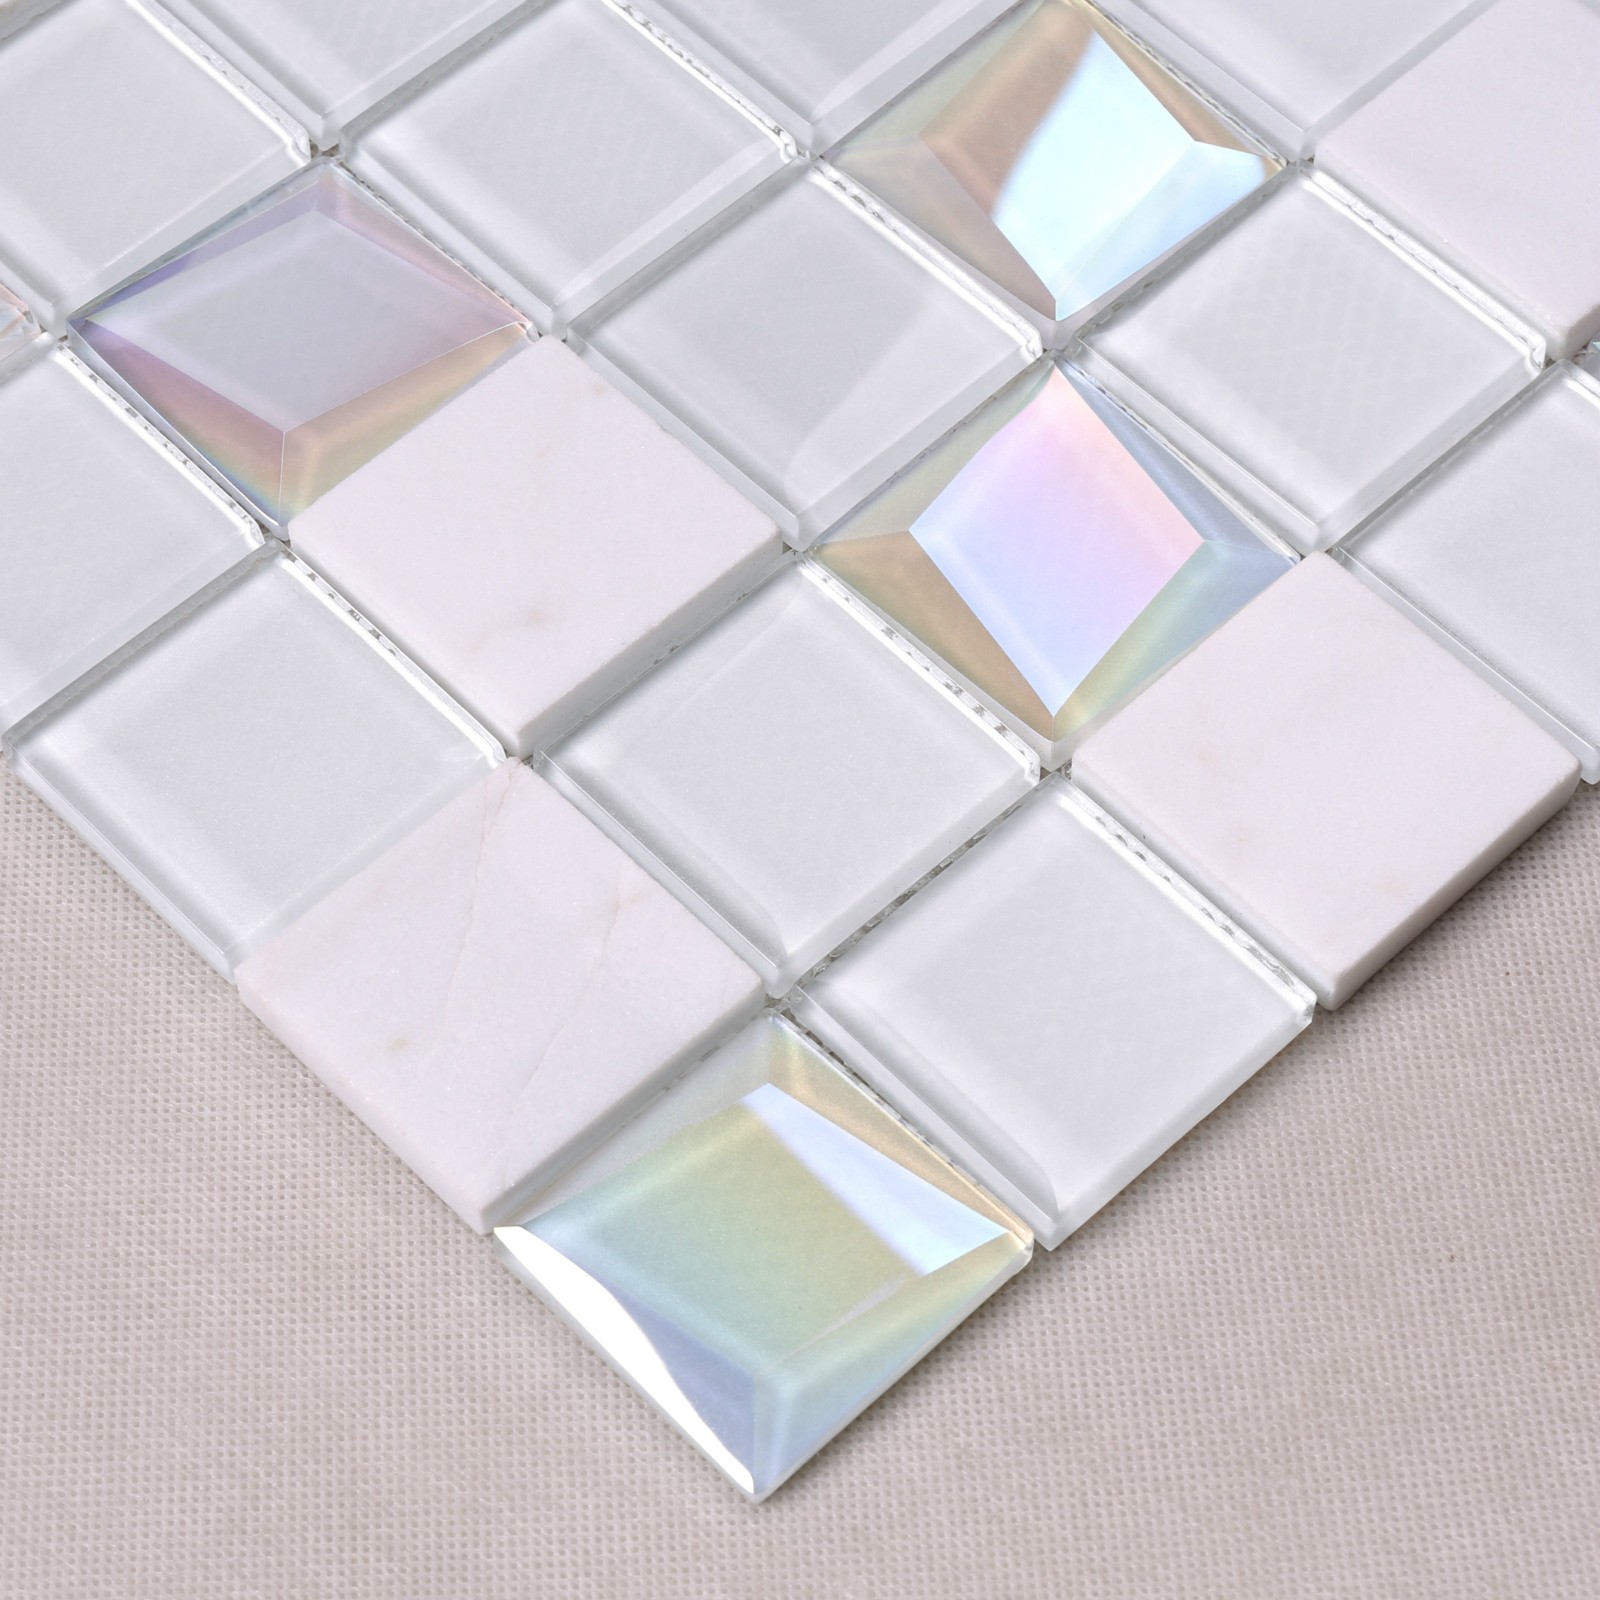 Heng Xing Best 1x1 glass tile sheets factory price for kitchen-3